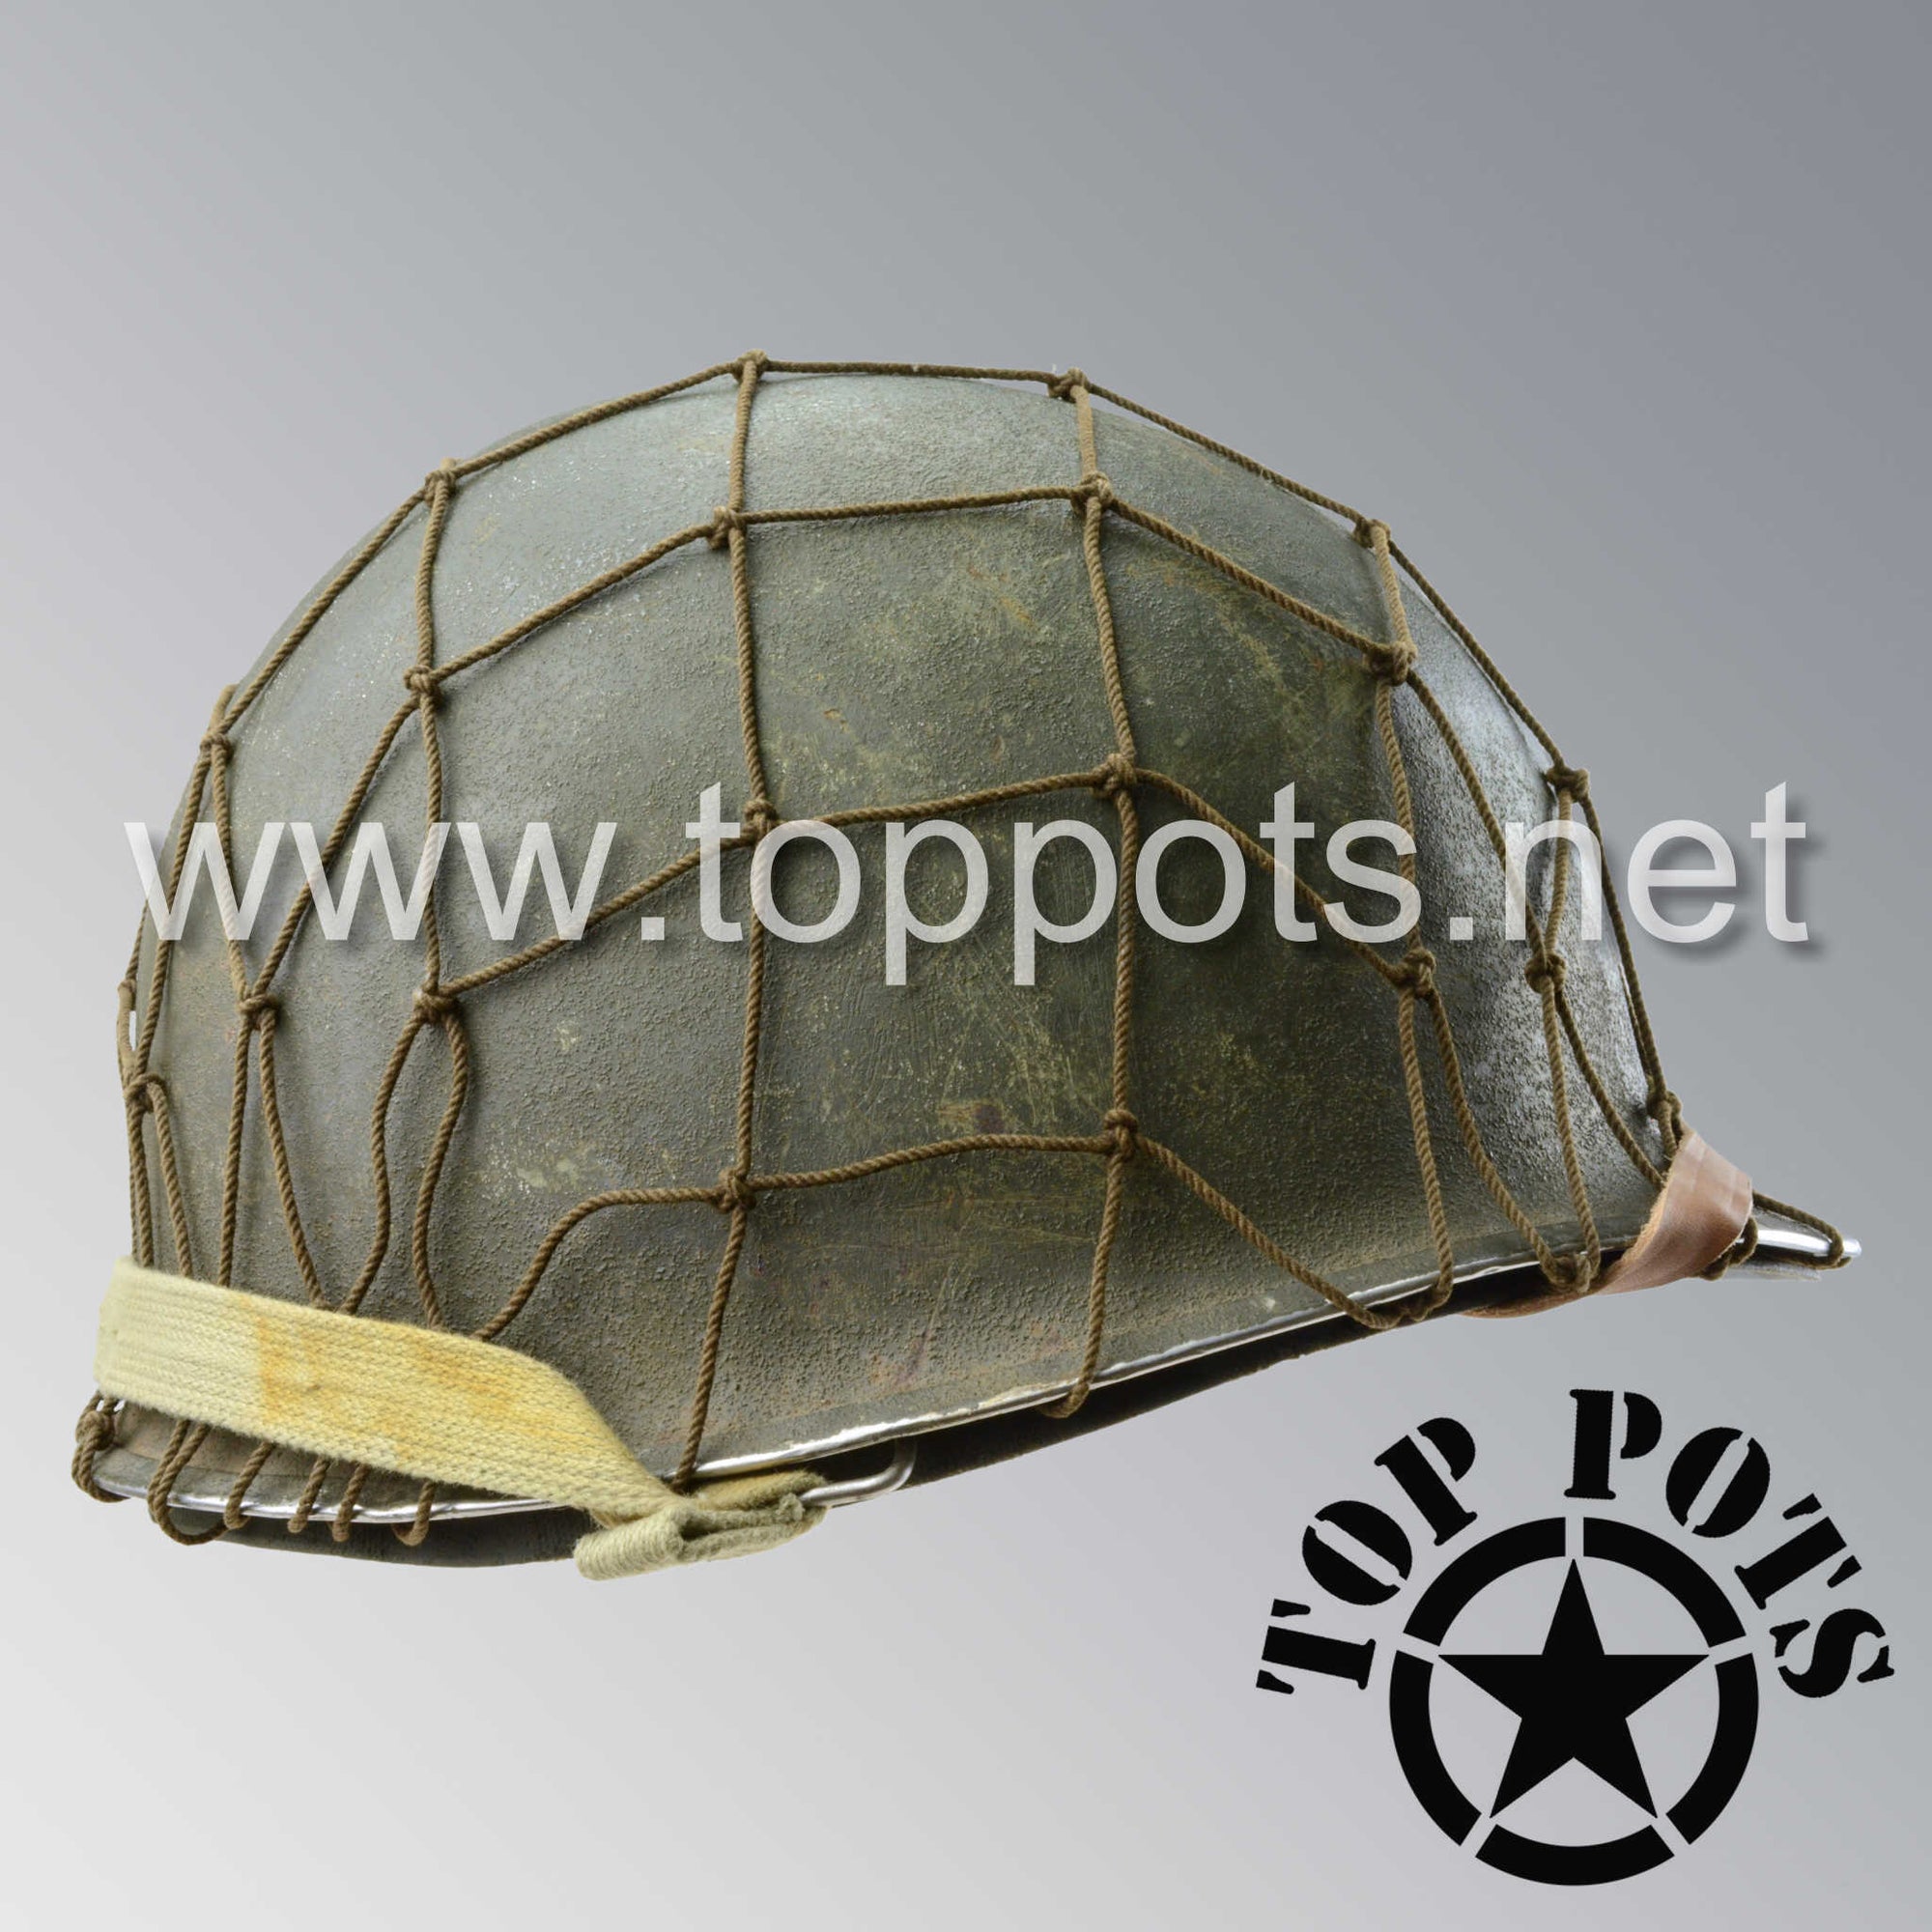 WWII US Army Original M1 Infantry or M1C Paratrooper Airborne Helmet Net - Khaki Tan Cotton (NET ONLY... HELMET NOT INCLUDED)